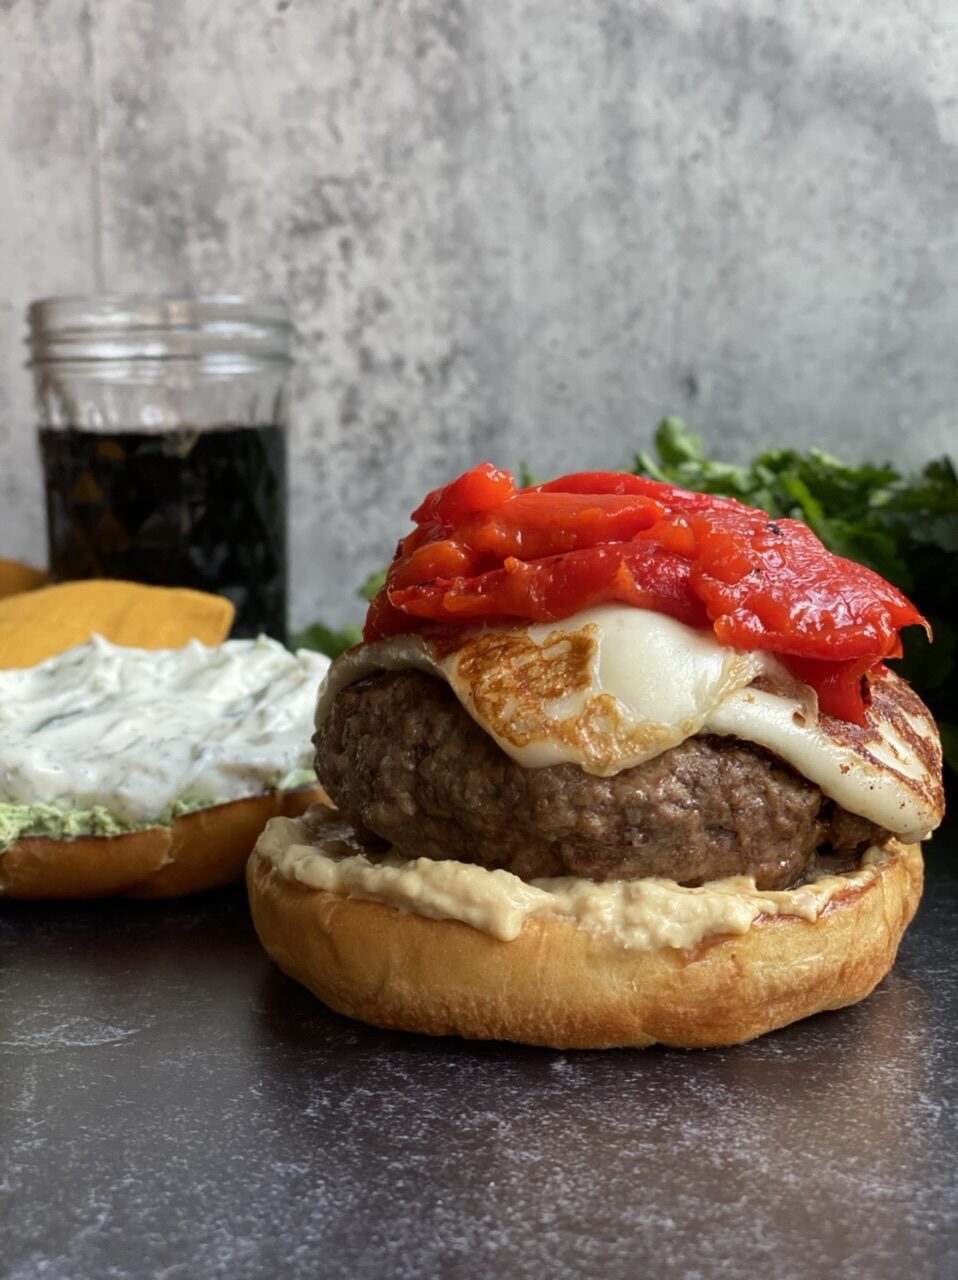 D917C573 3A56 4E36 ABD8 07990D75C624 e1623942210906 - Mediterranean Burgers with Fried Halloumi, Roasted Red Peppers, Tzatziki, & Garlic Hummus with a Cilantro Goat Cheese Spread